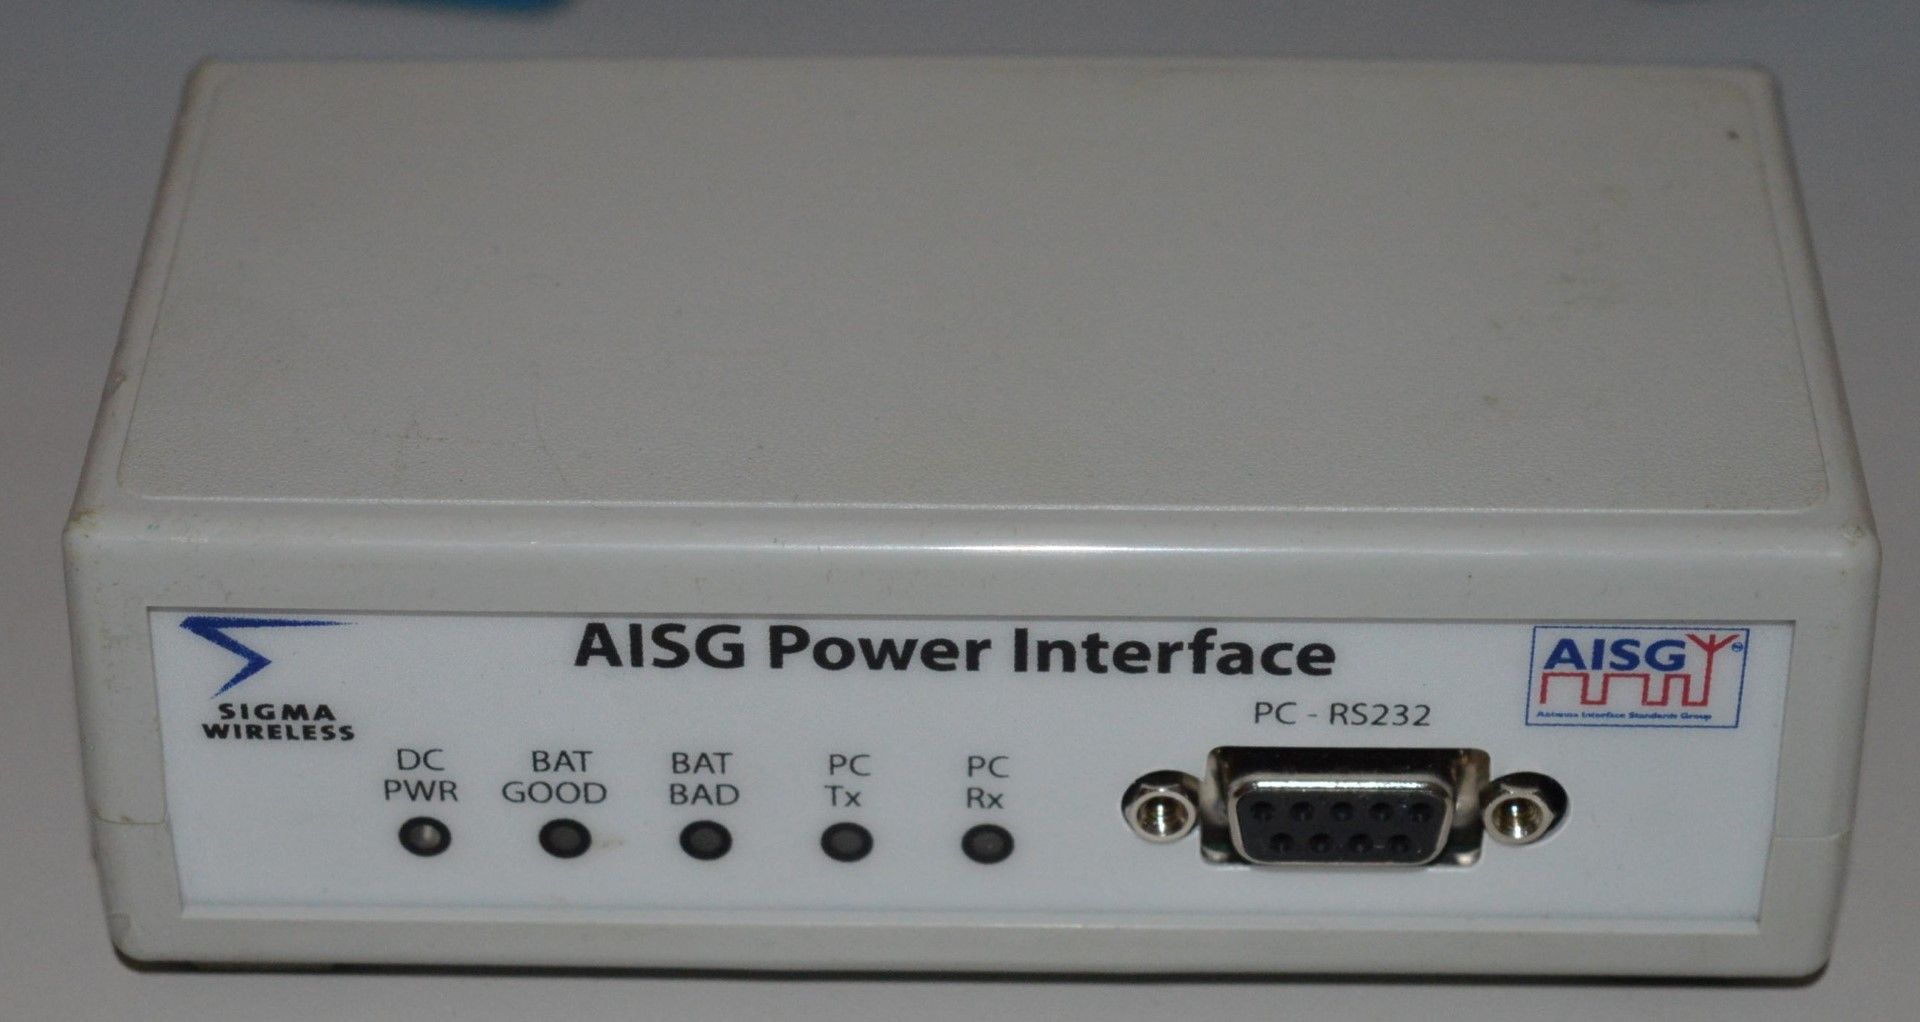 1 x Sigma AISG Power Interface - Rechargwable Version - Wireless Controller - CL300 - Ref PC149 - - Image 3 of 5